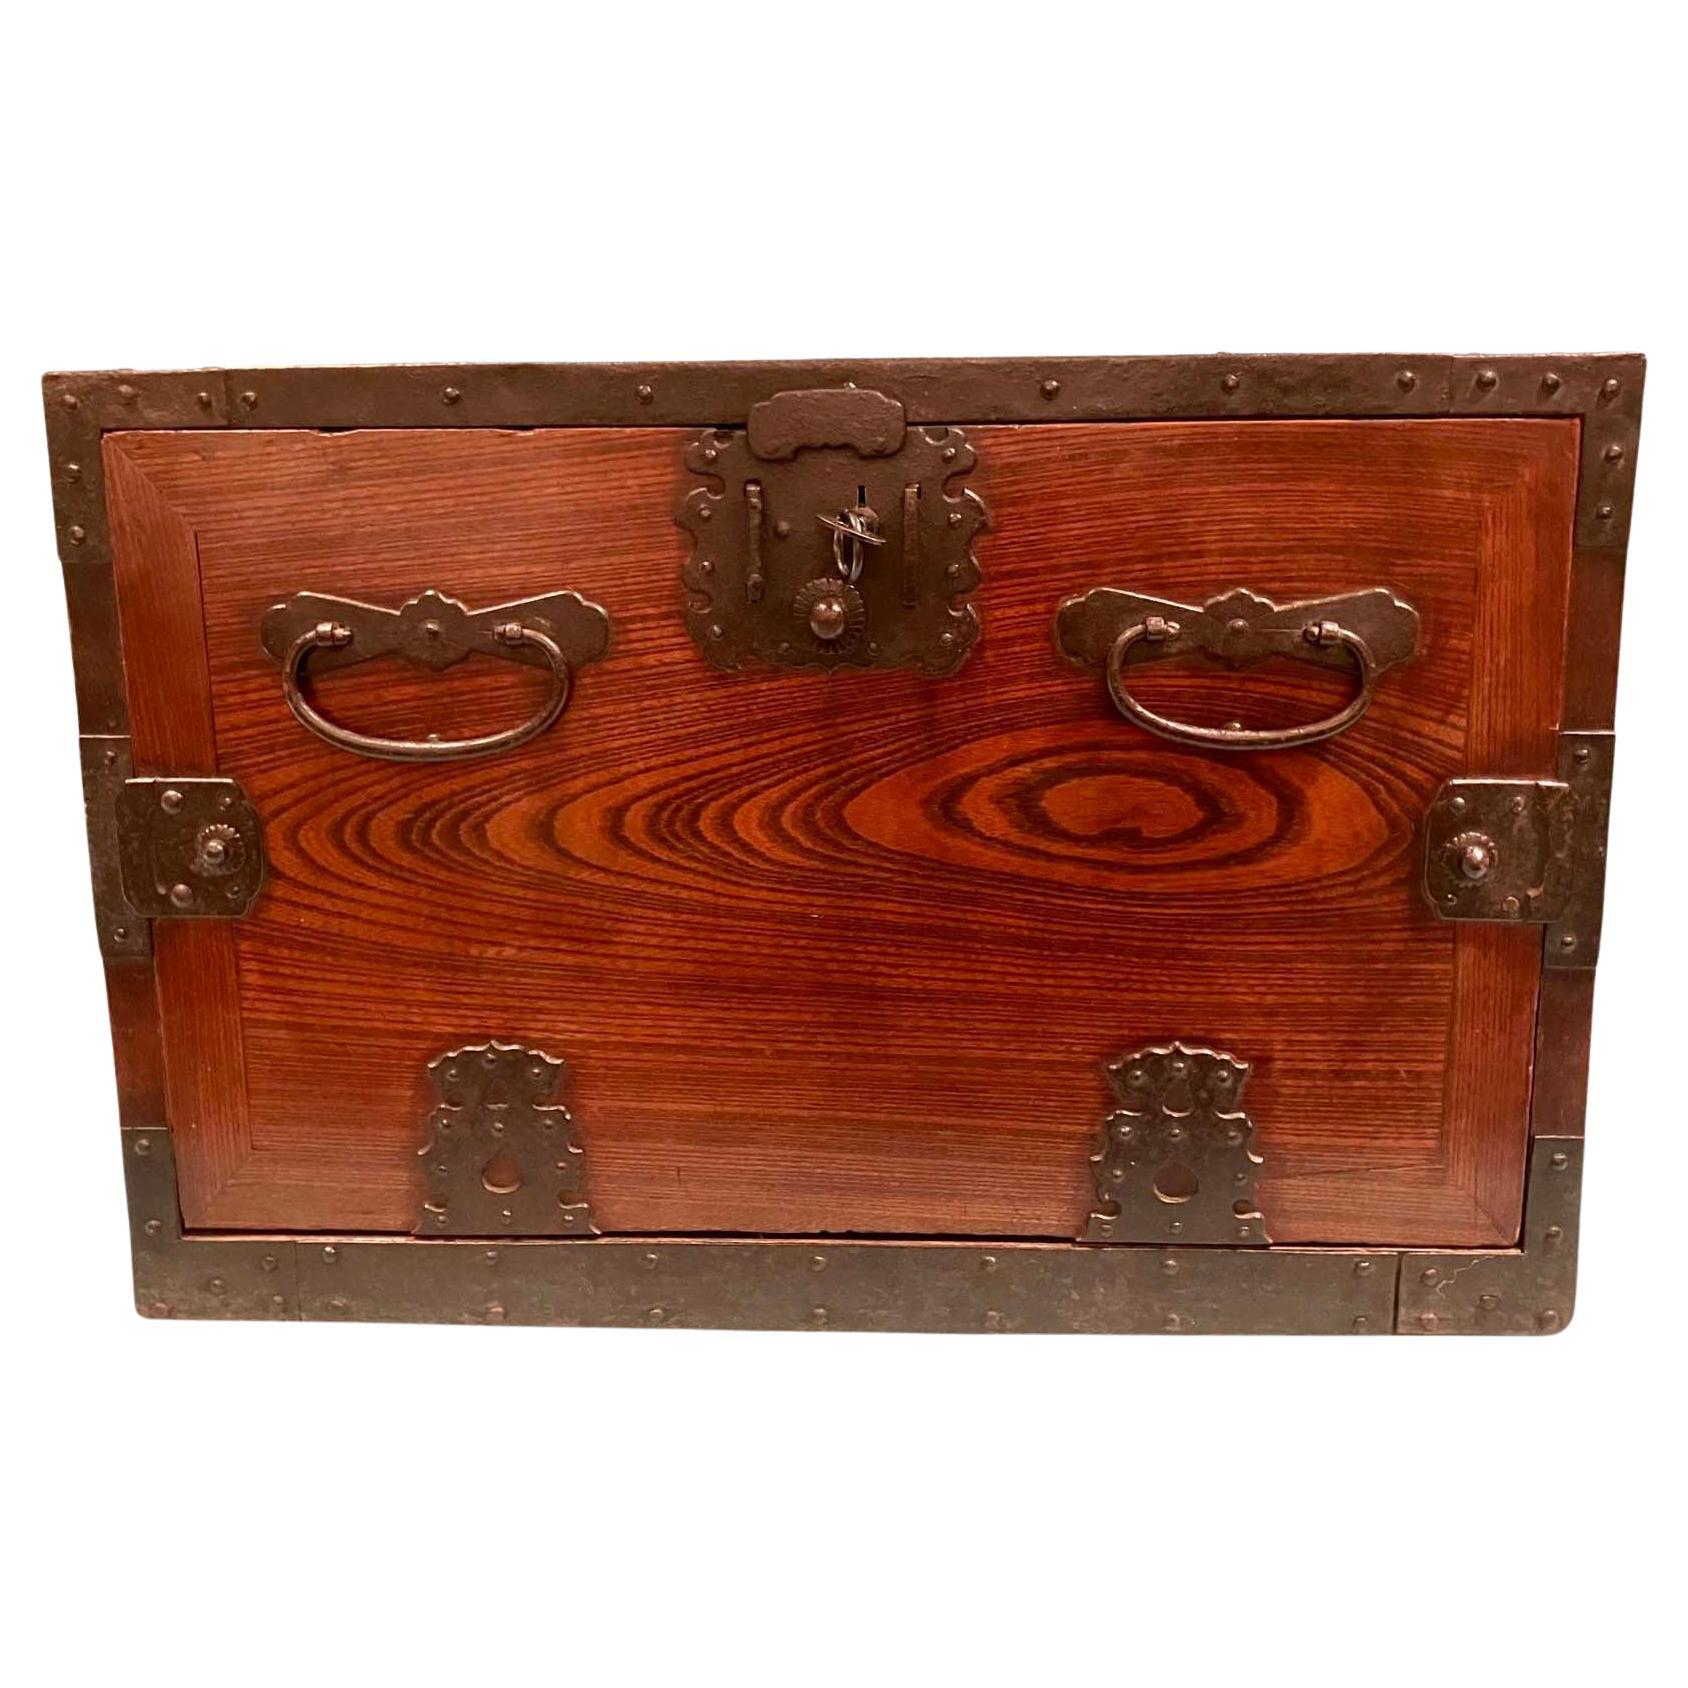 What is a sea chest?